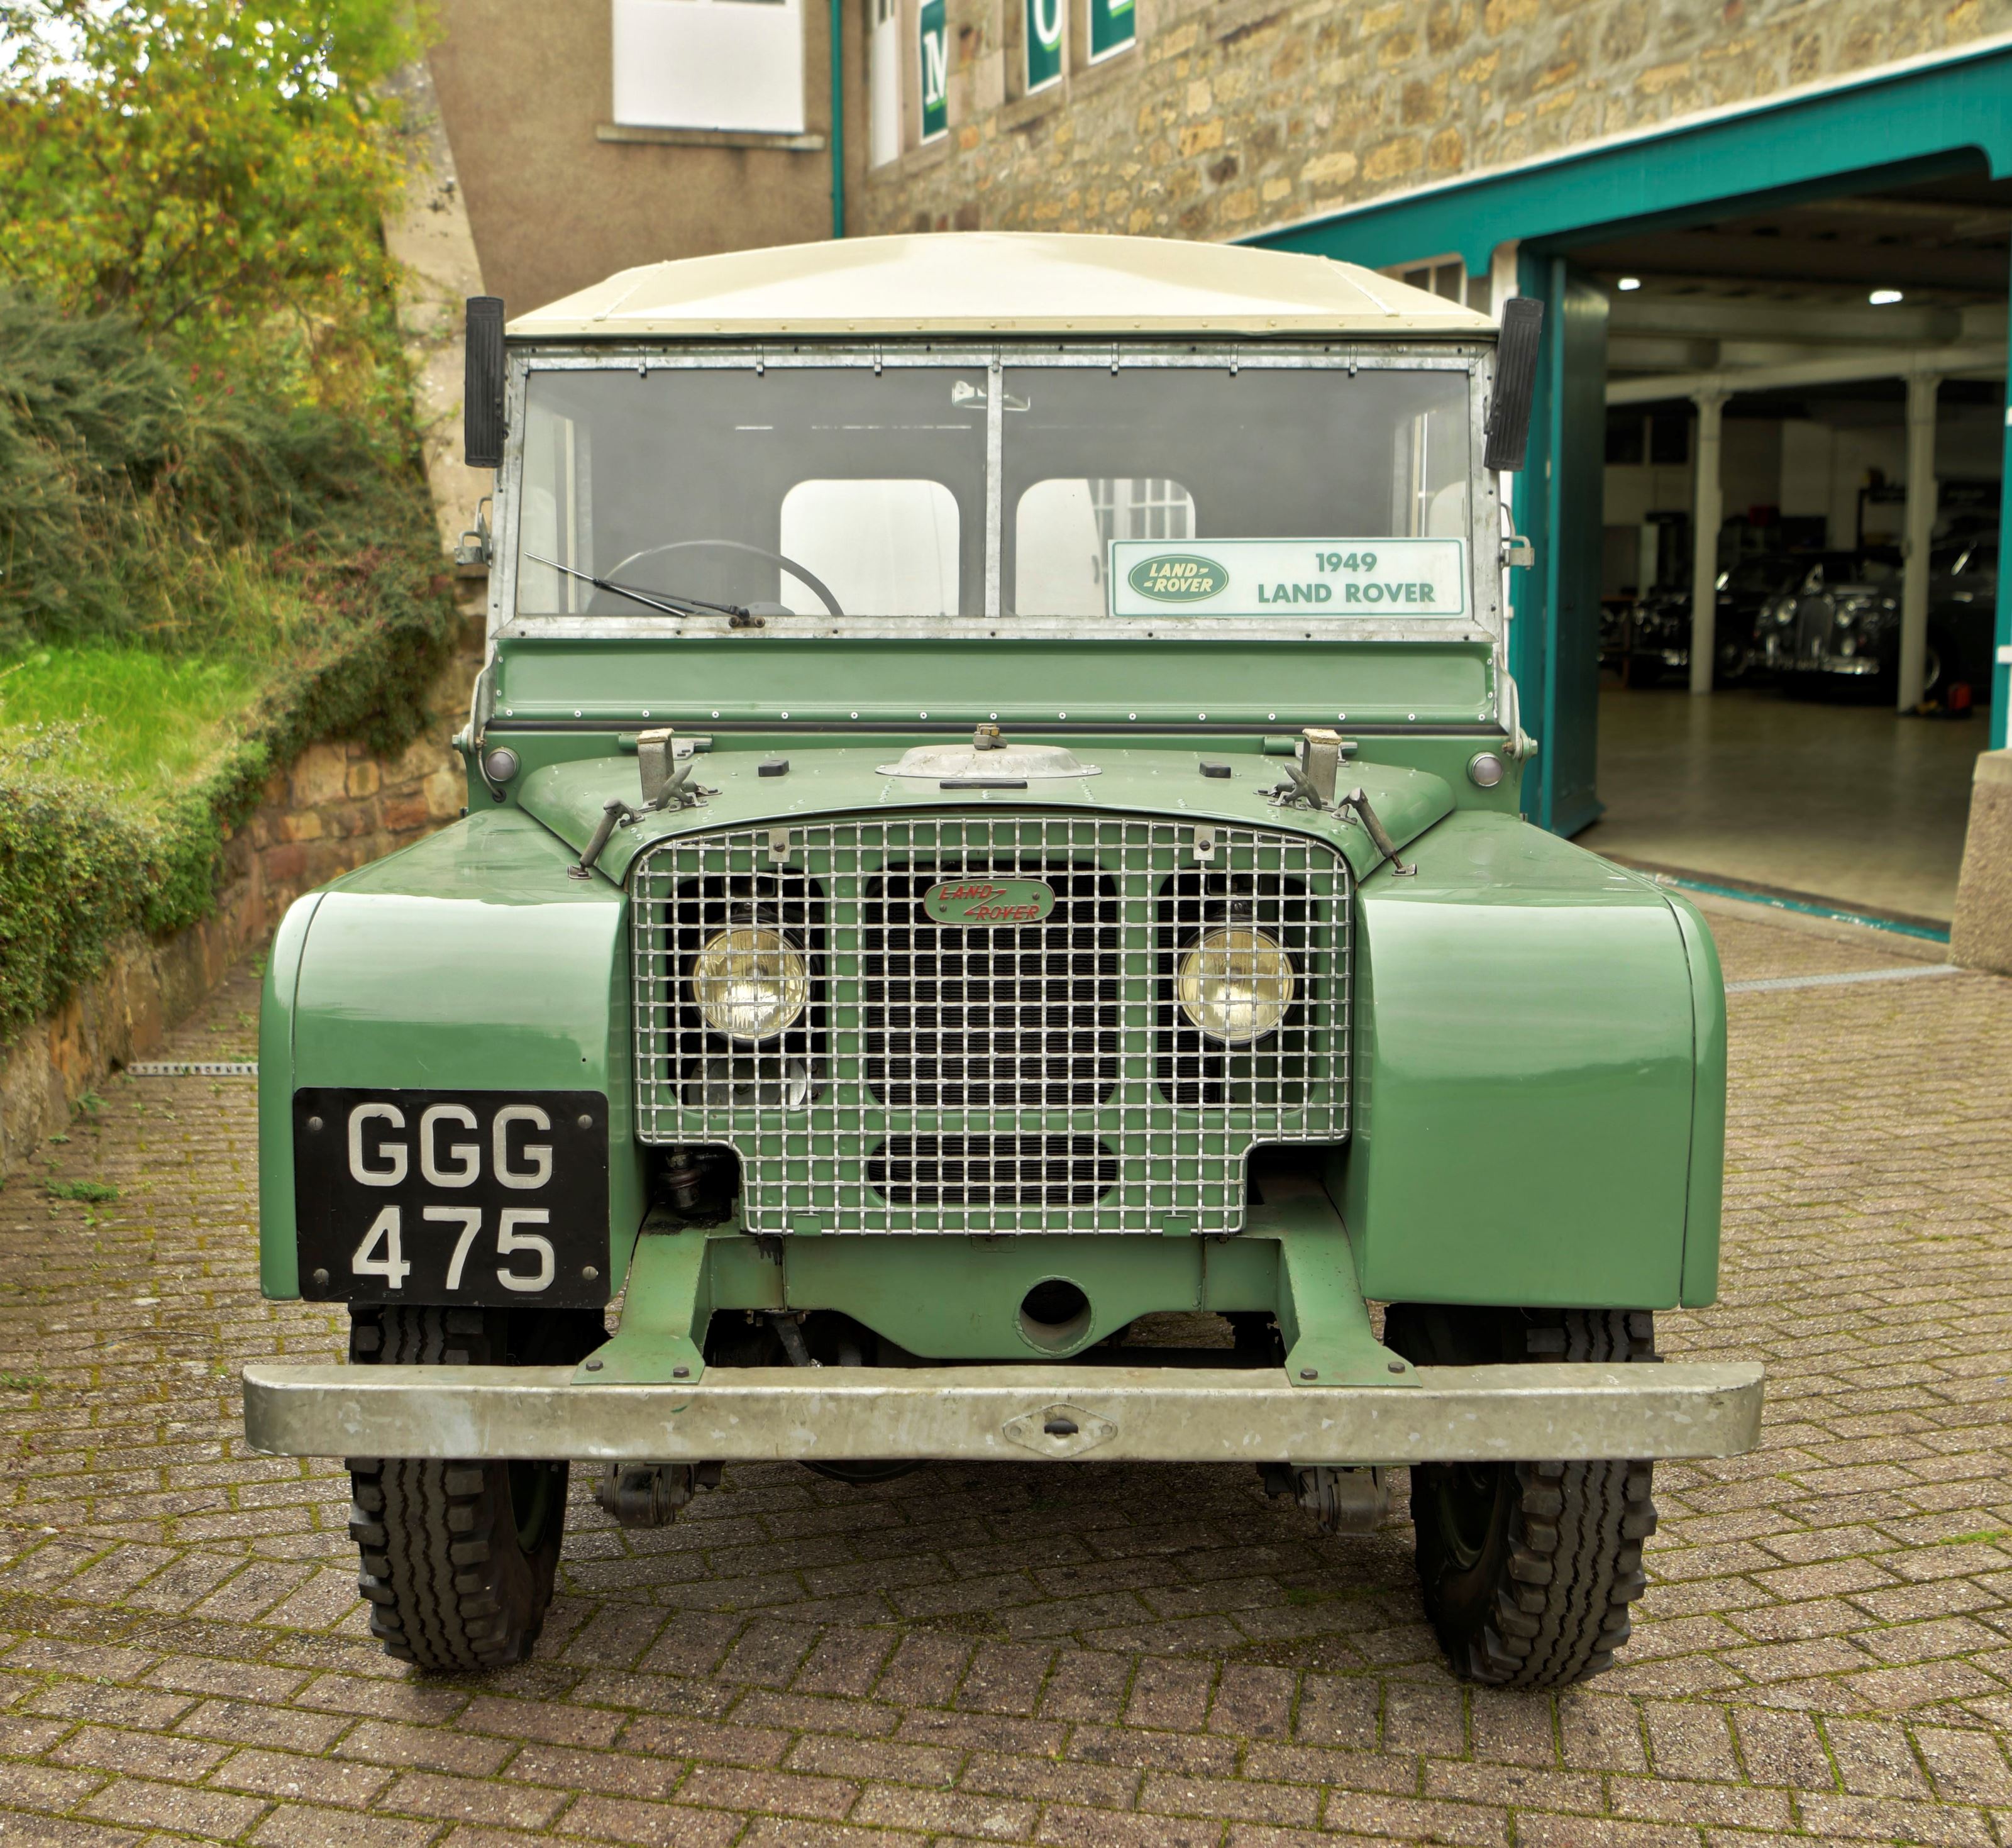 Land rover series 1 swb with hard top anyeqrd2s97xsd3satxkb